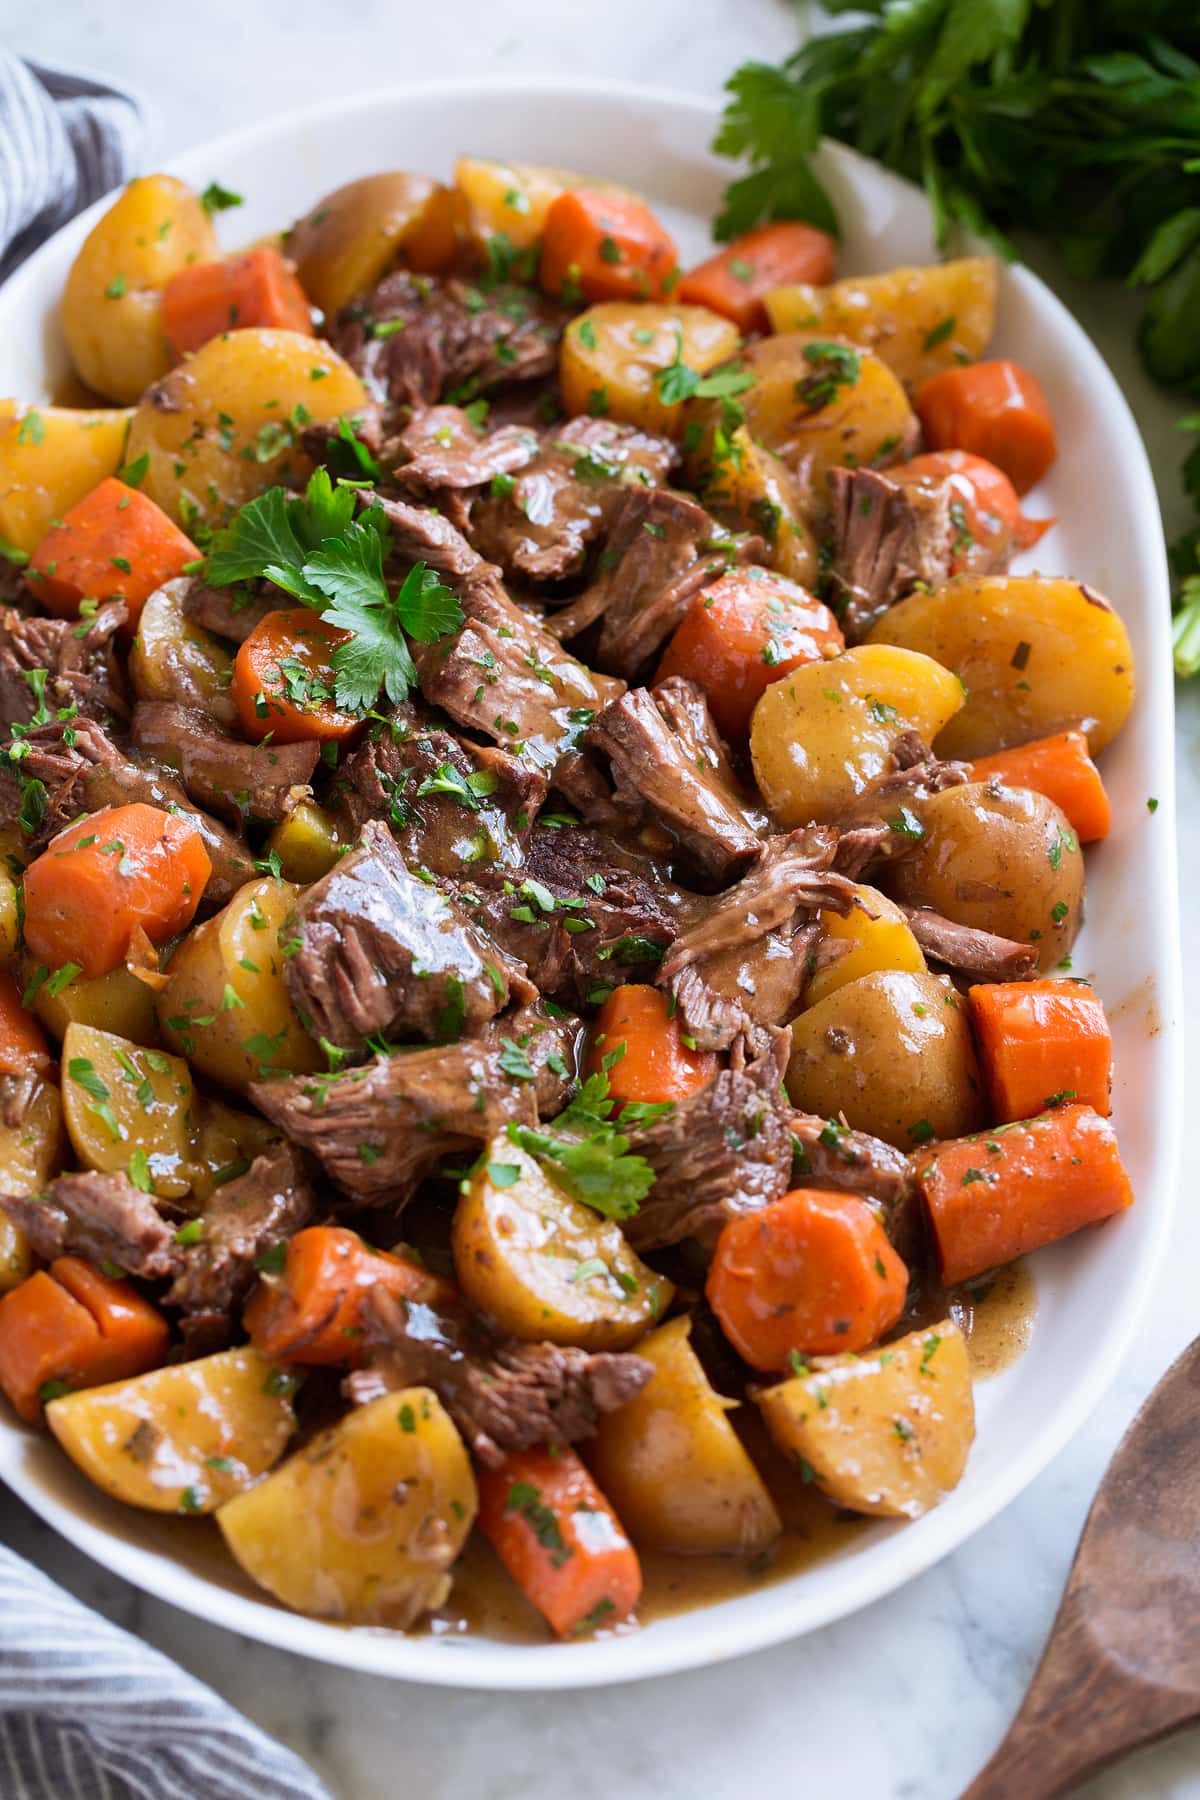 Shredded slow cooker pot roast with potatoes and carrots on a white serving platter garnished with parsley.